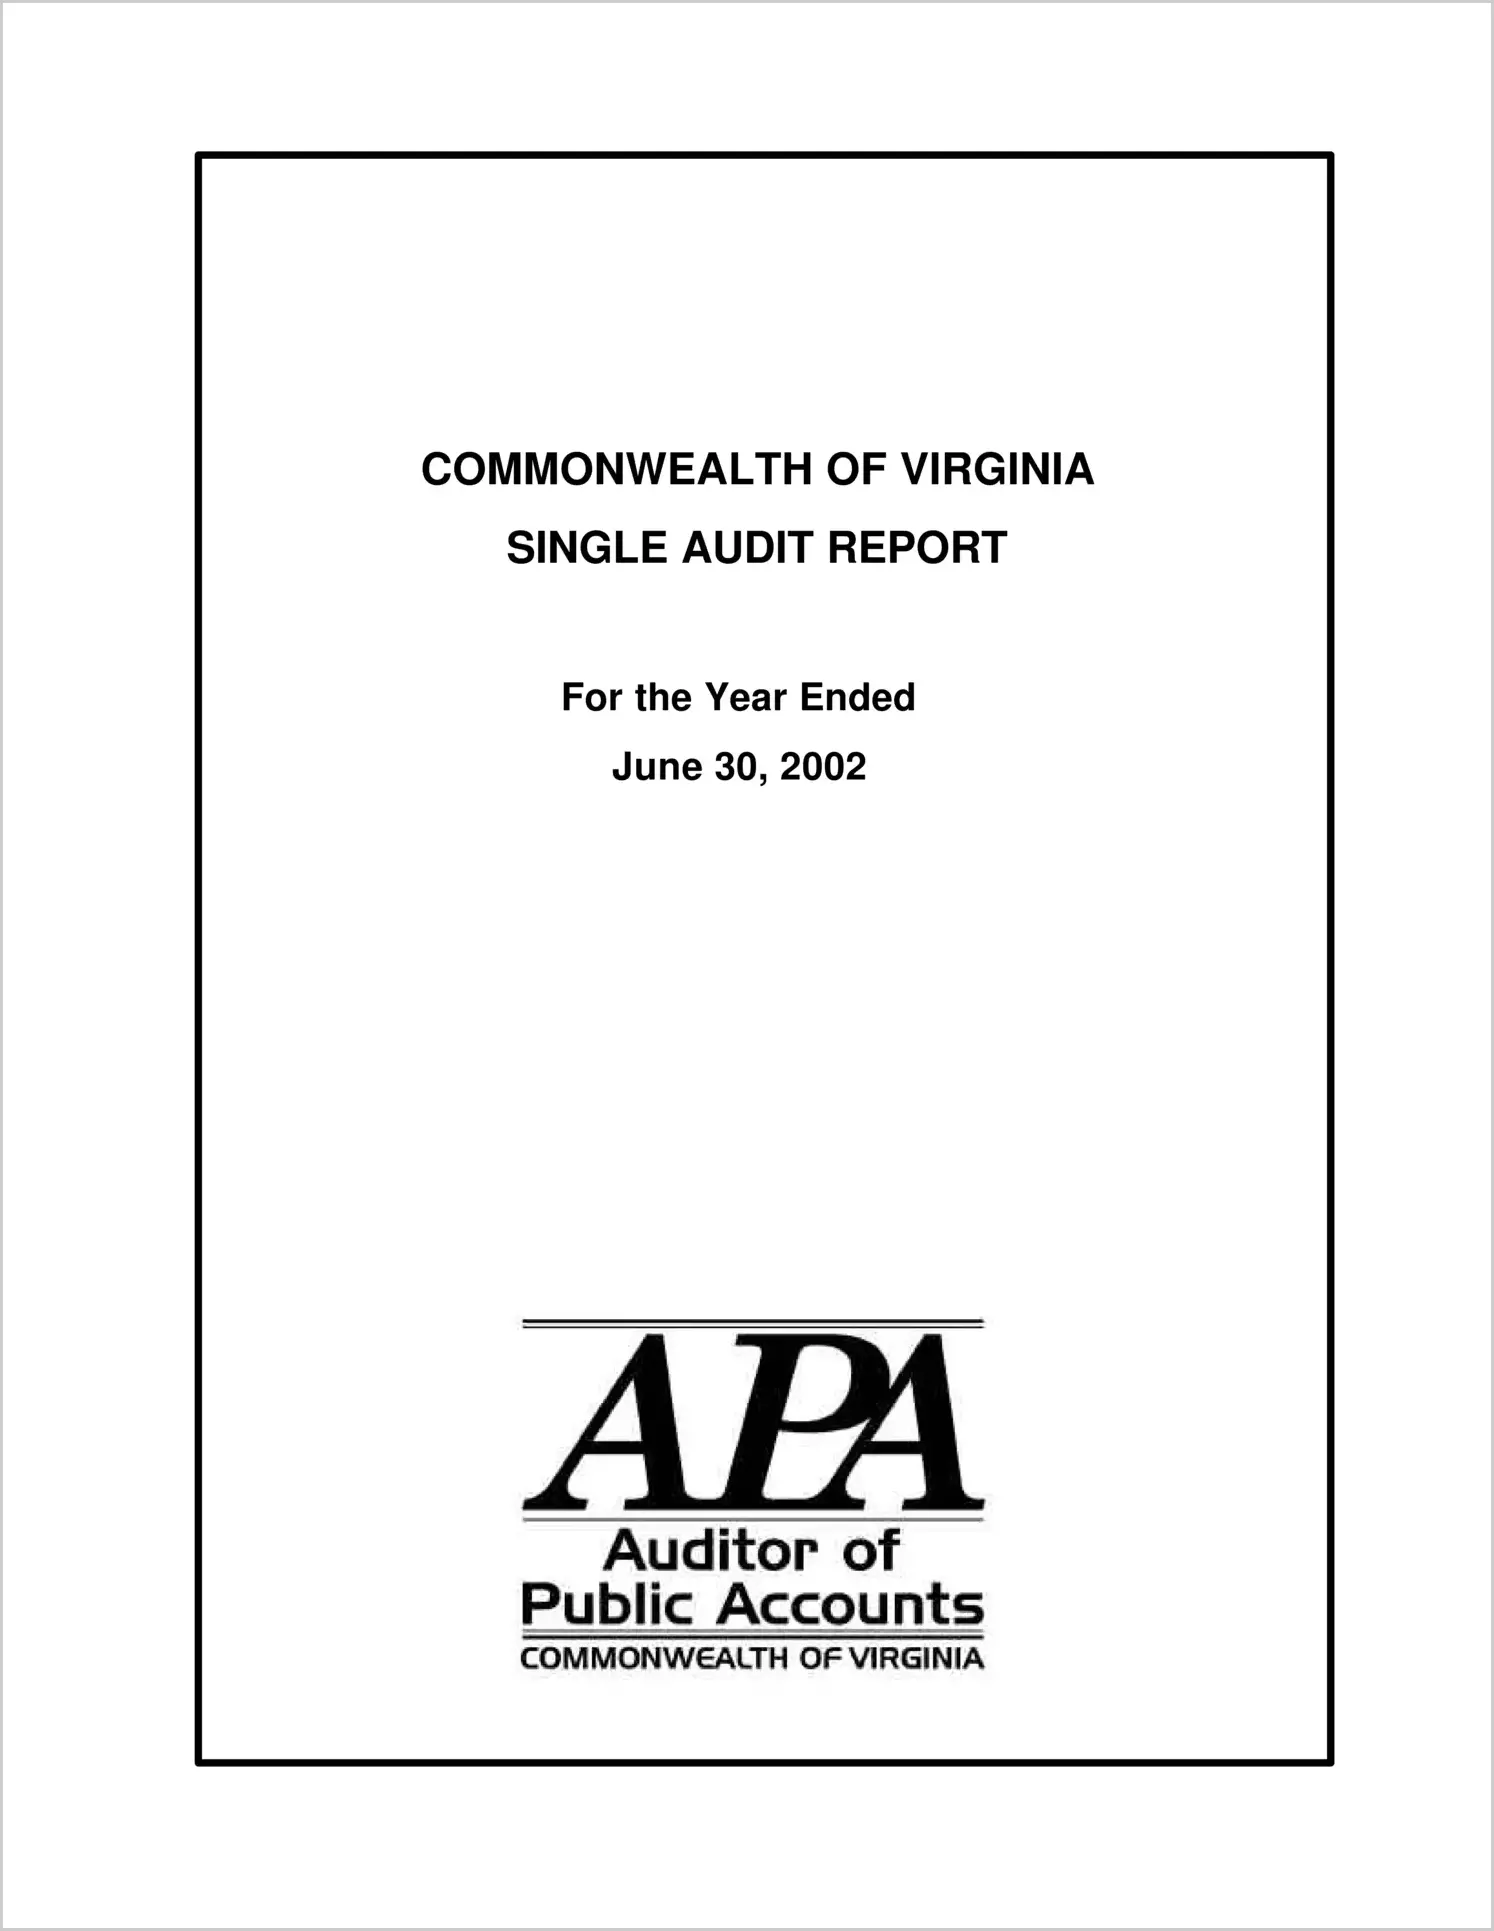 Commonwealth of Virginia Single Audit Report for the Year Ended June 30, 2002